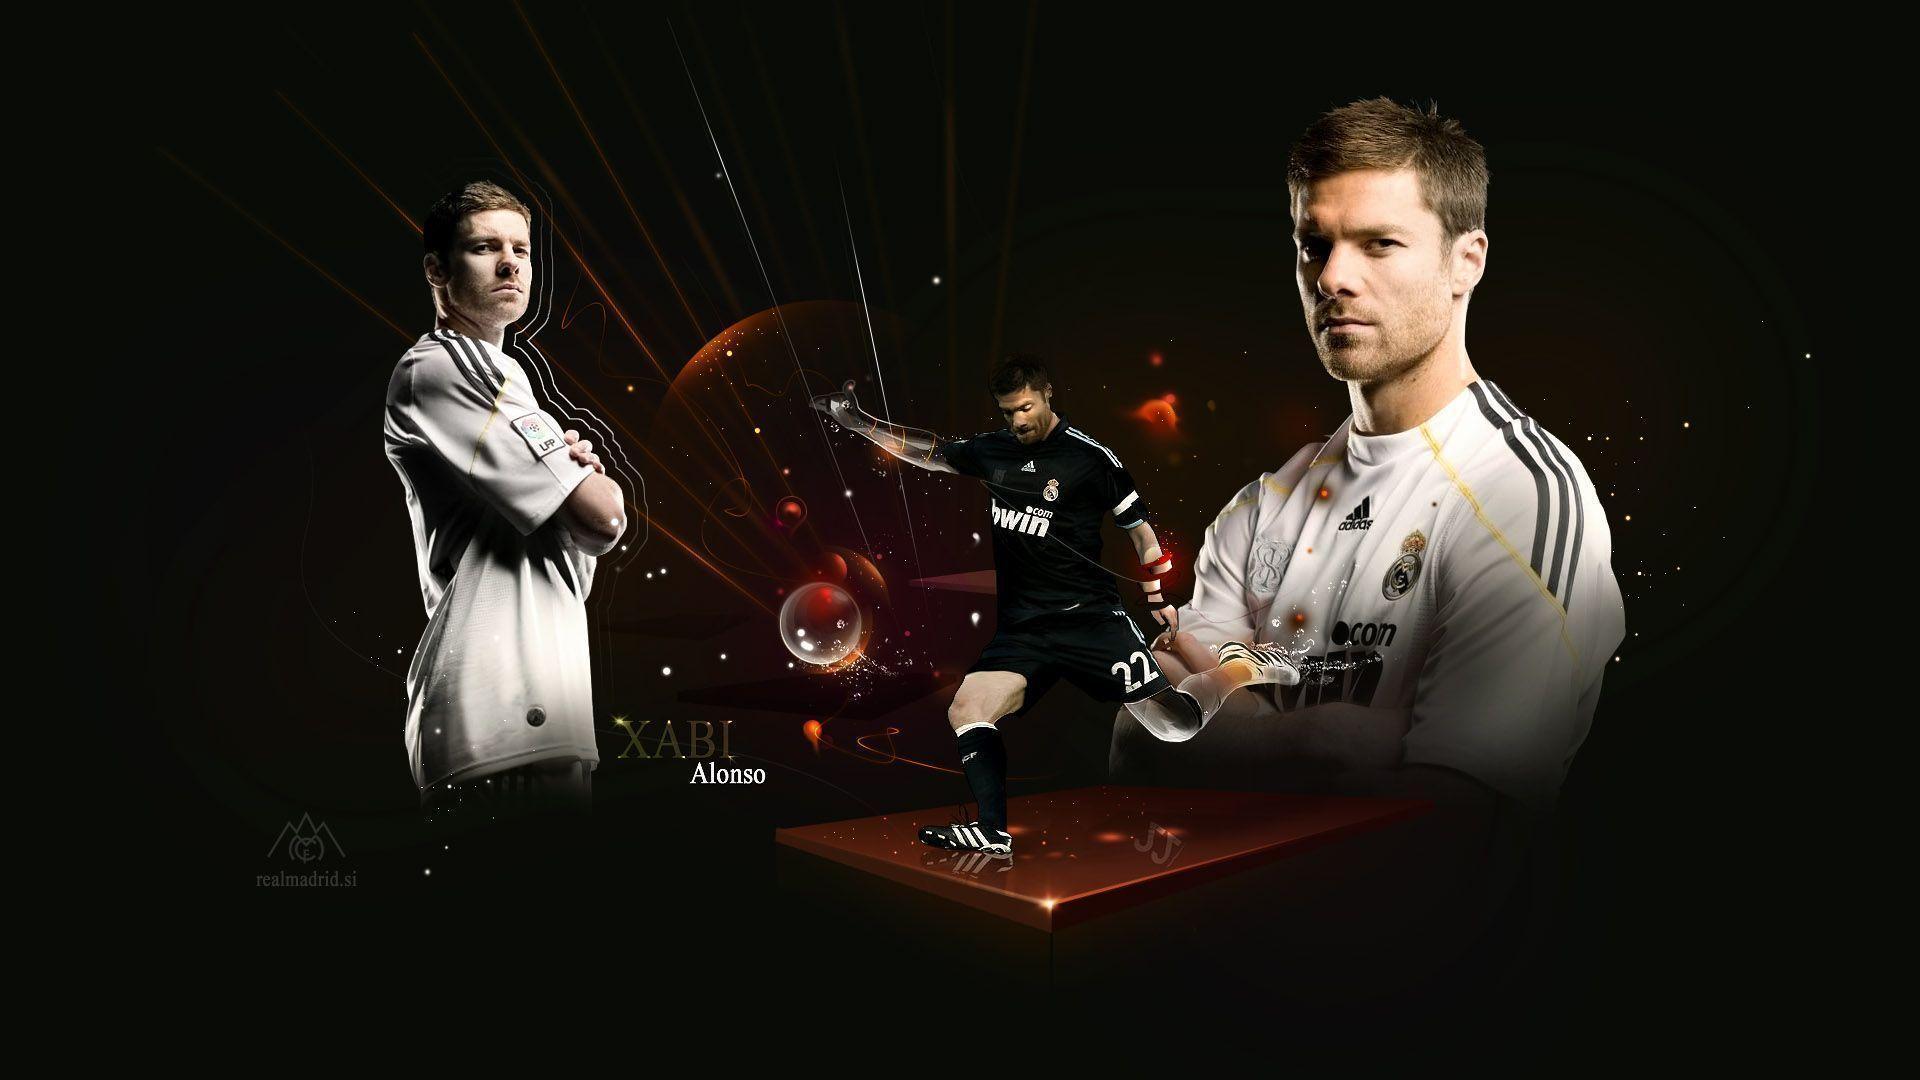 Xabi Alonso 2014 Real Madrid Wallpaper Wide or HD. Male